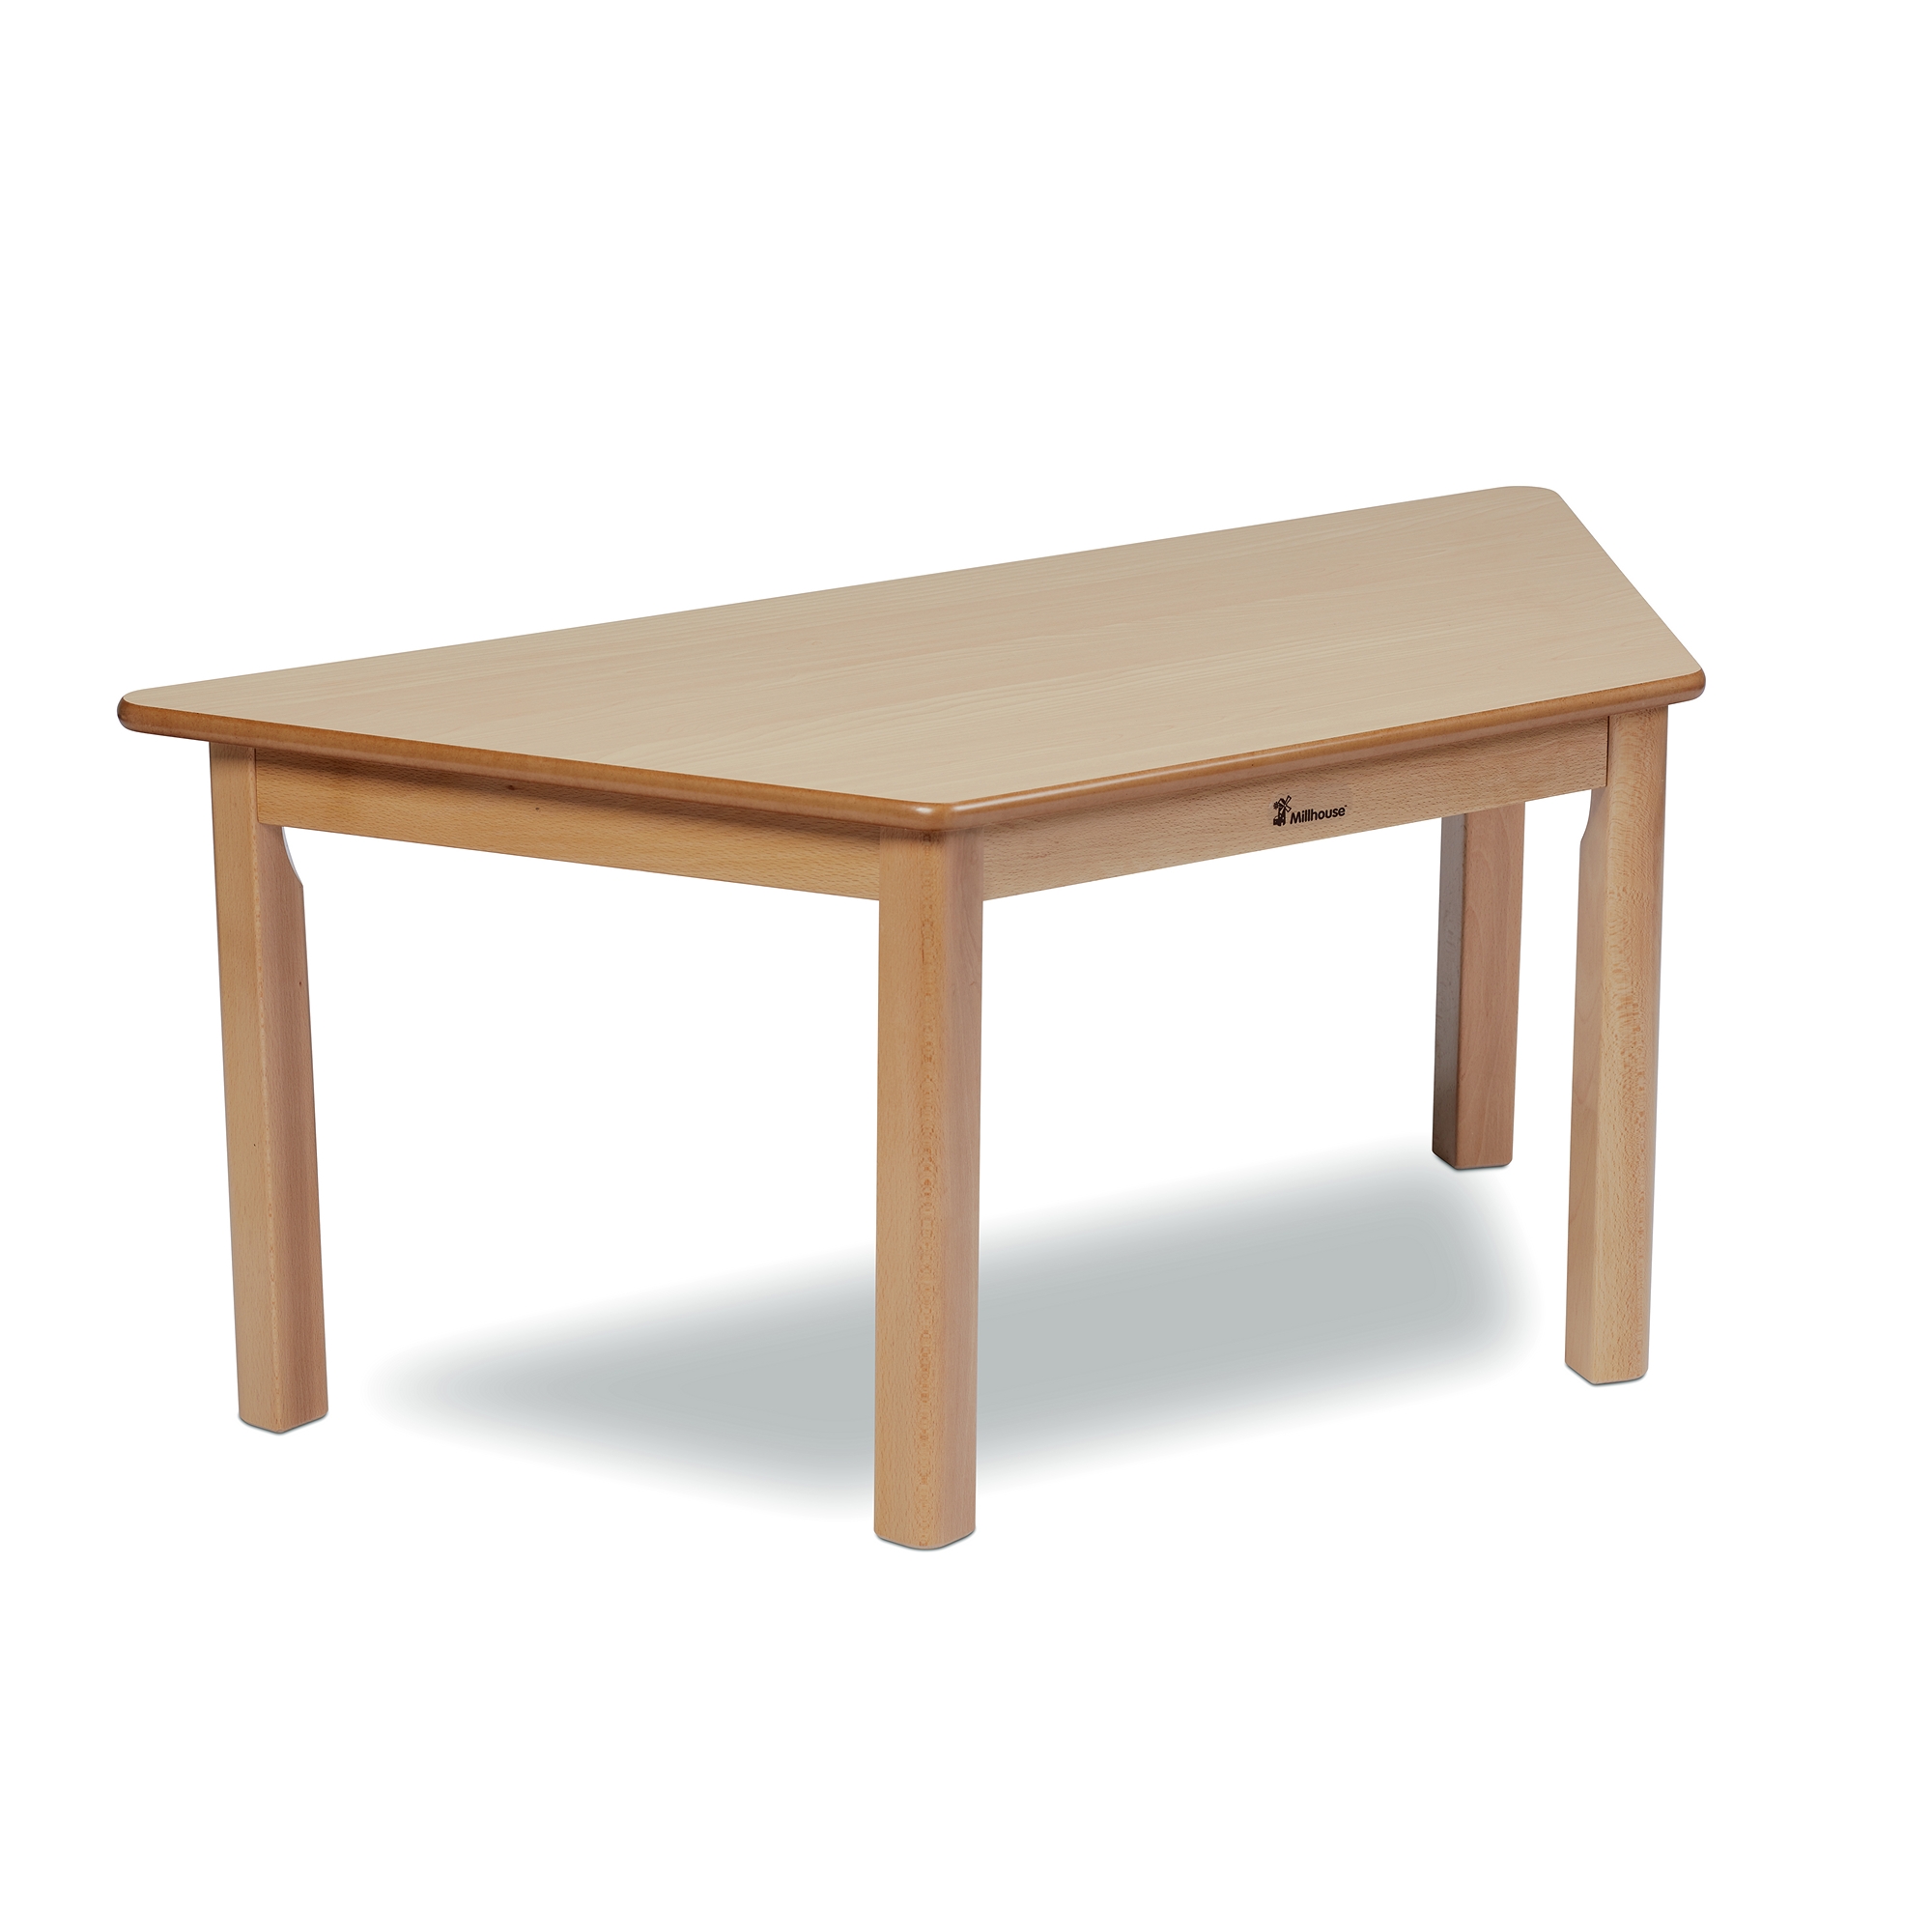 Playscapes Trapezoid Table - 400mm Height